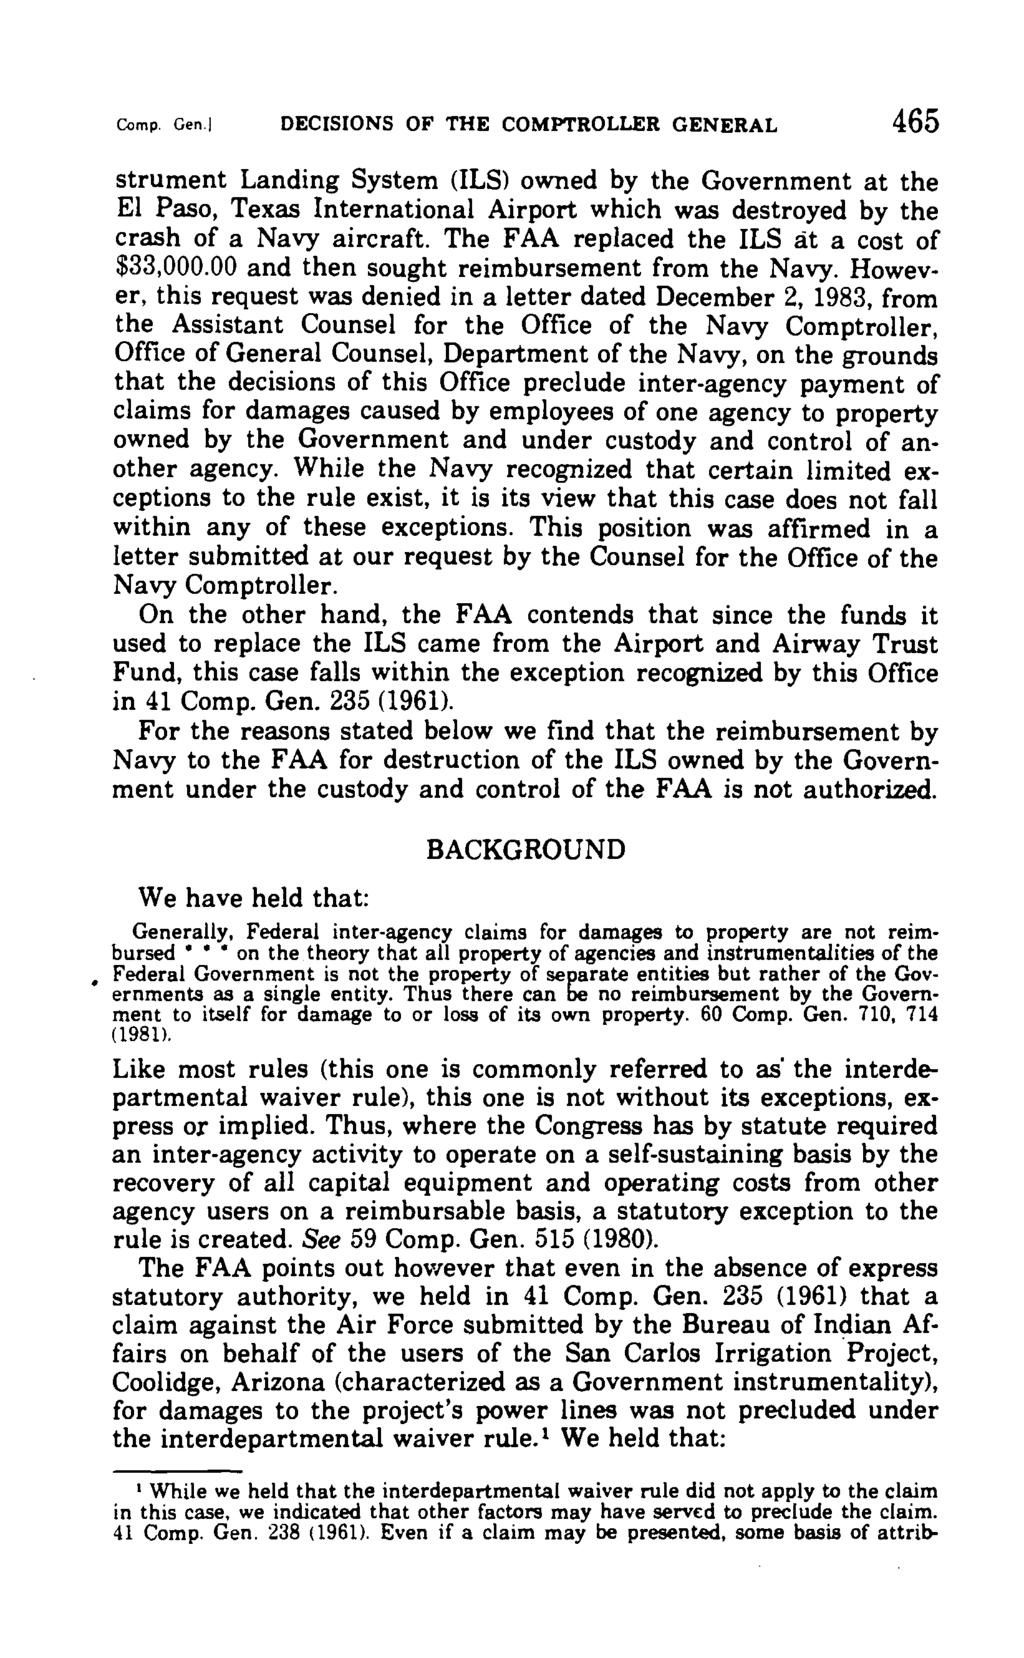 Comp. Gen,j DECISIONS OF THE COMPTROLLER GENERAL 465 strument Landing System (ILS) owned by the Government at the El Paso, Texas International Airport which was destroyed by the crash of a Navy